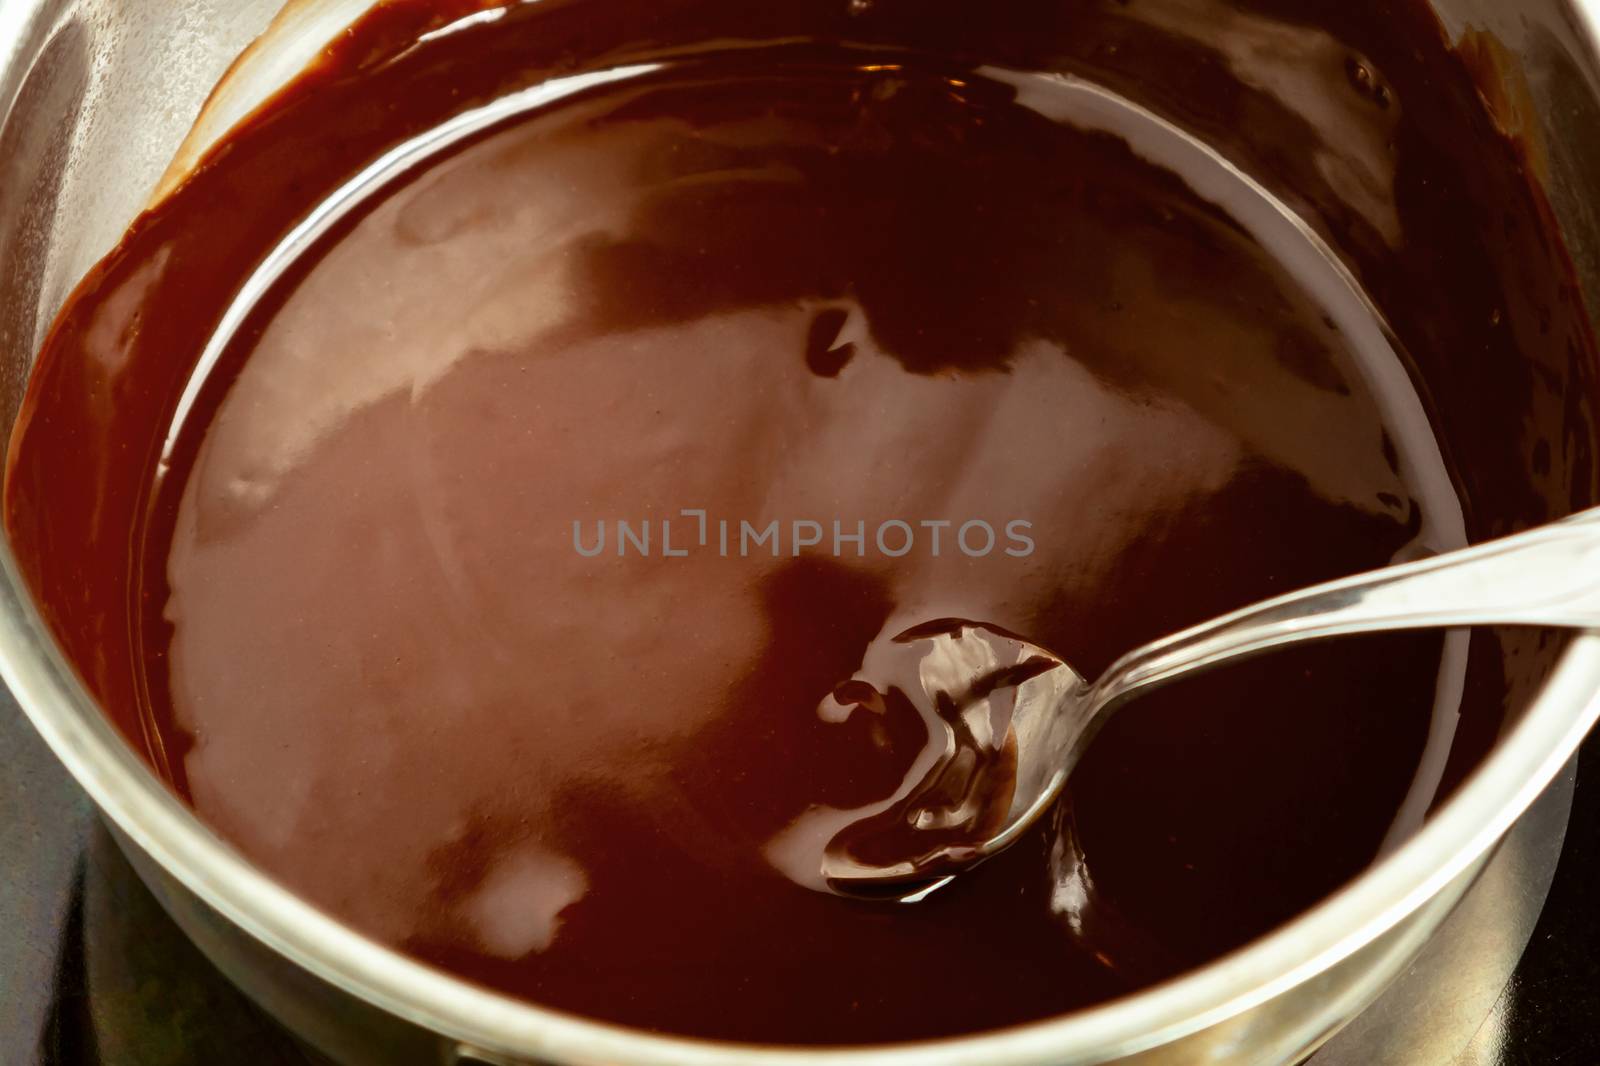 Melting dark chocolate in a saucepan on the stove by galsand